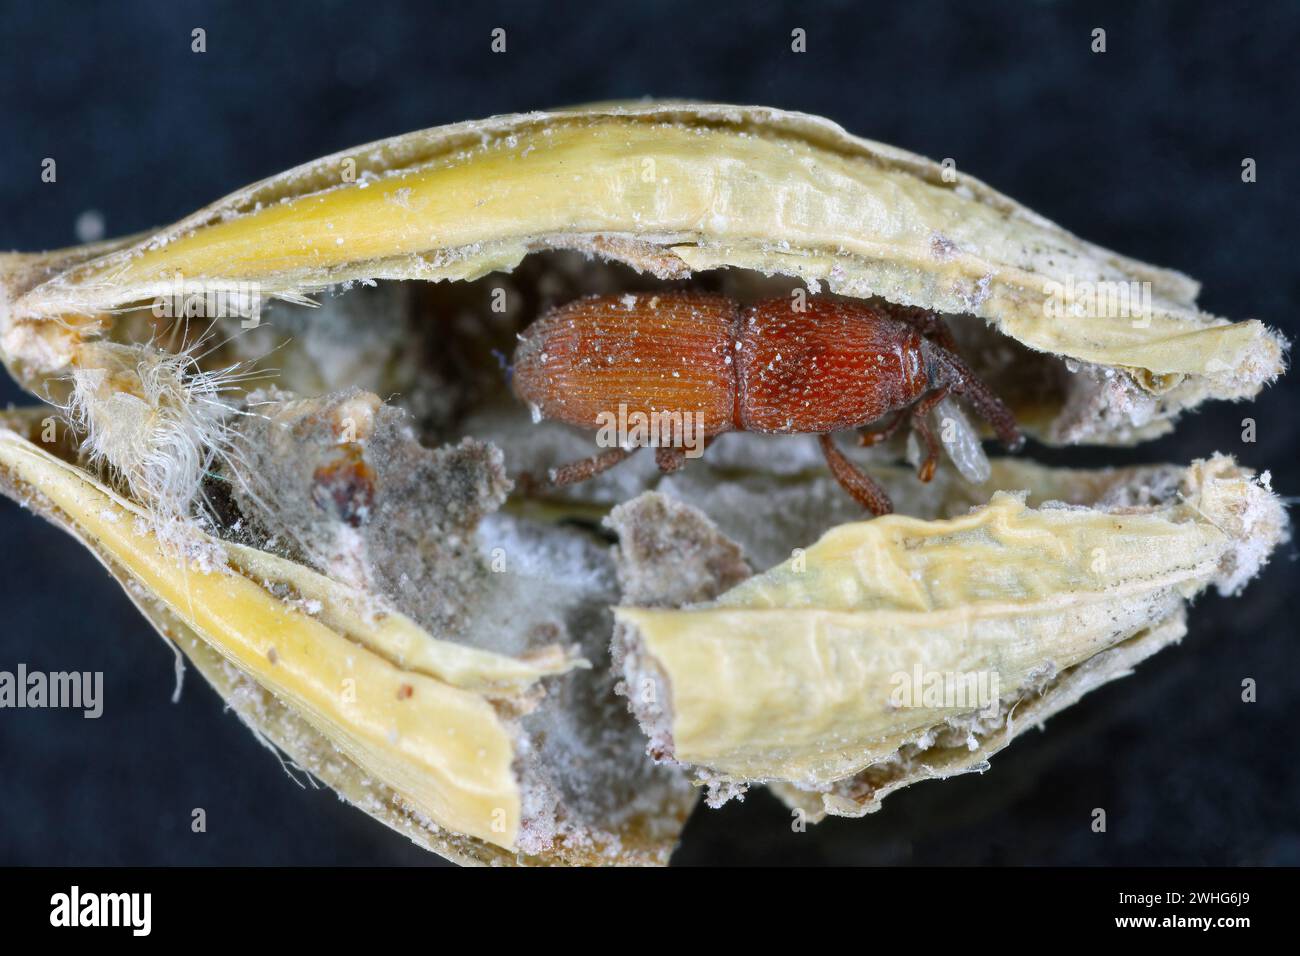 Granary Weevil (Sitophilus granarius) also called Grain or Wheat Weevil. Young beetle developing inside the grain. Stock Photo